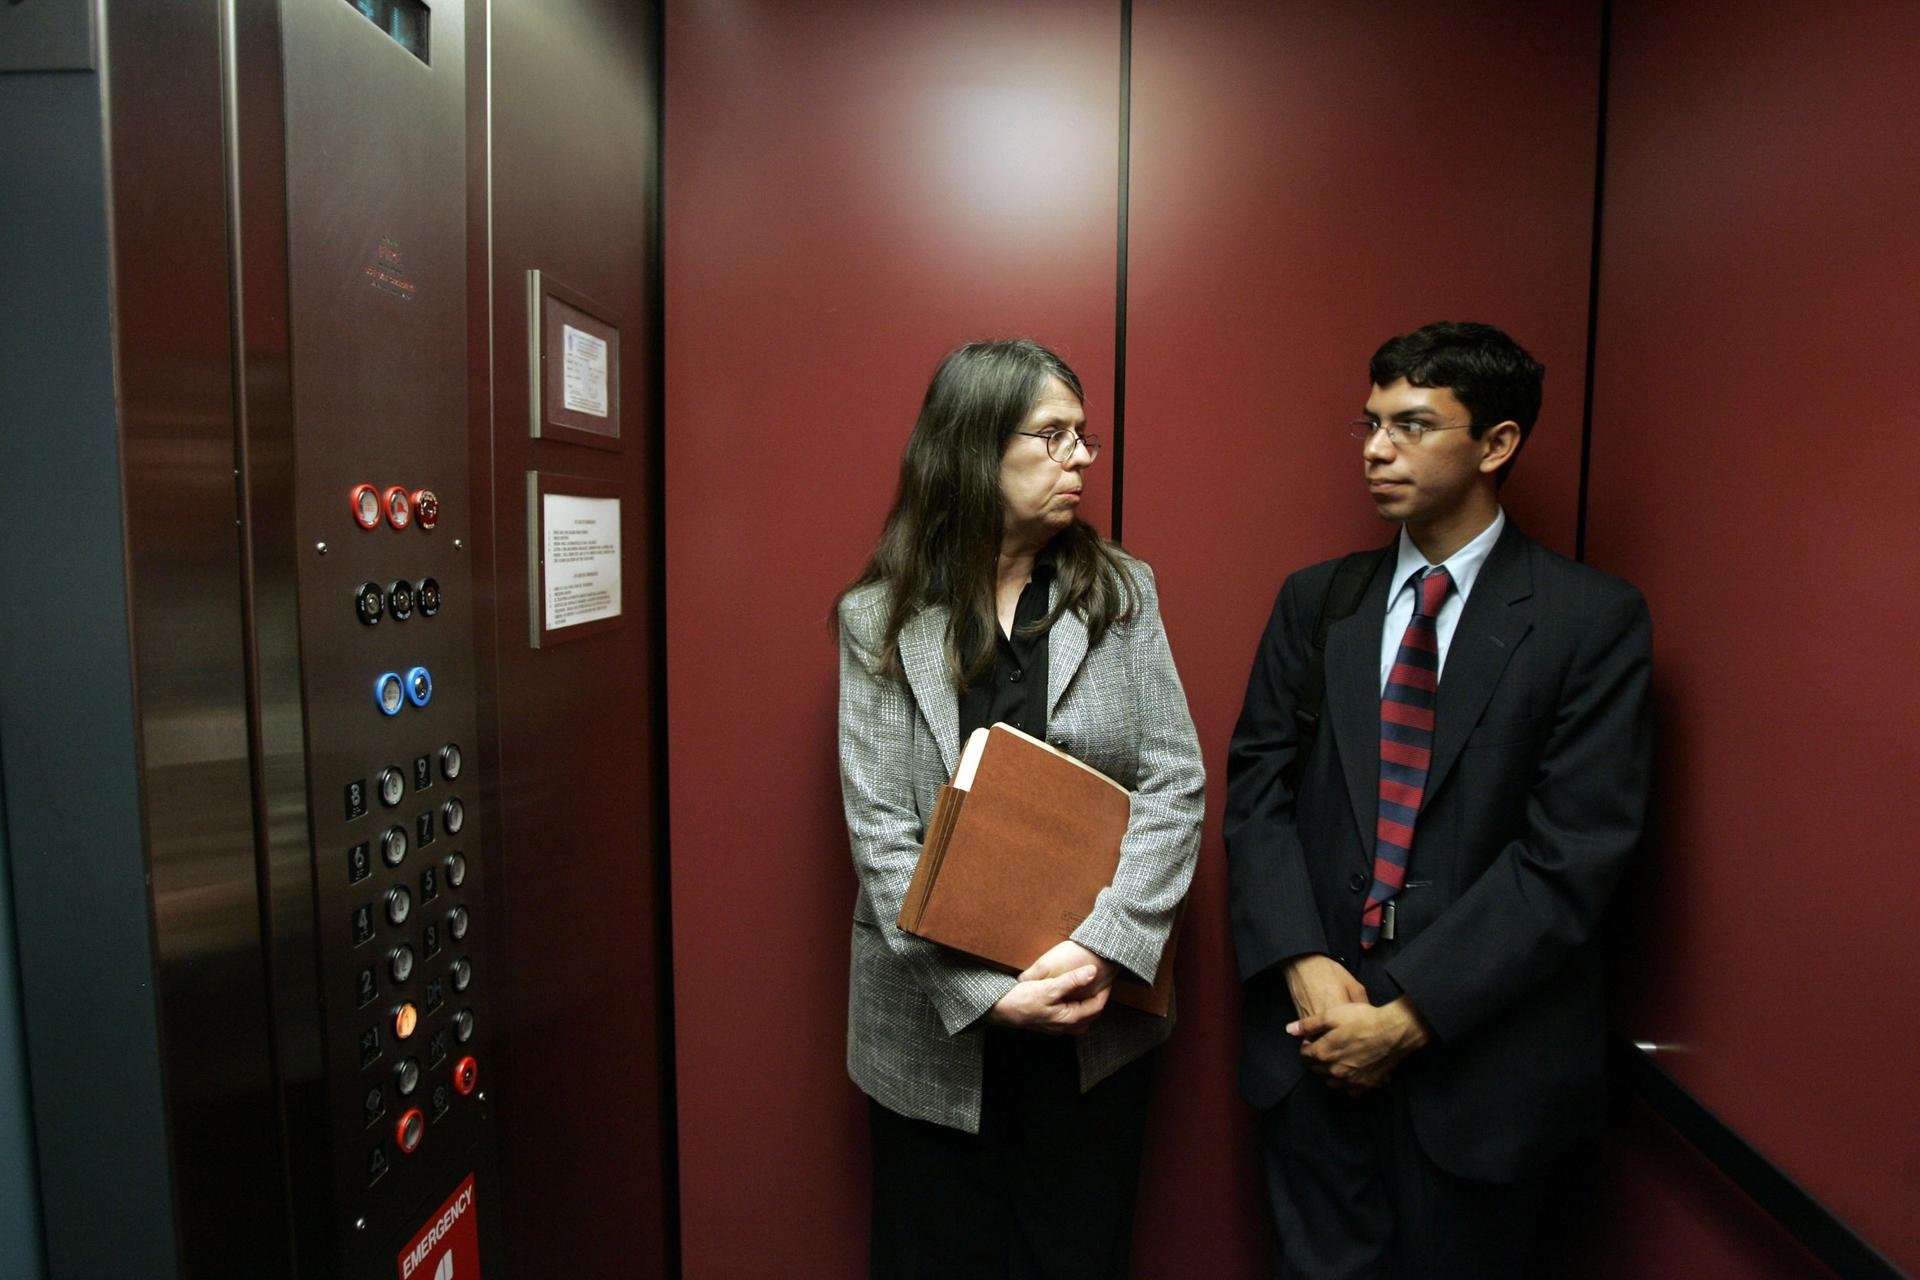 Woman and young man in suit holding papers look at each other in elevator